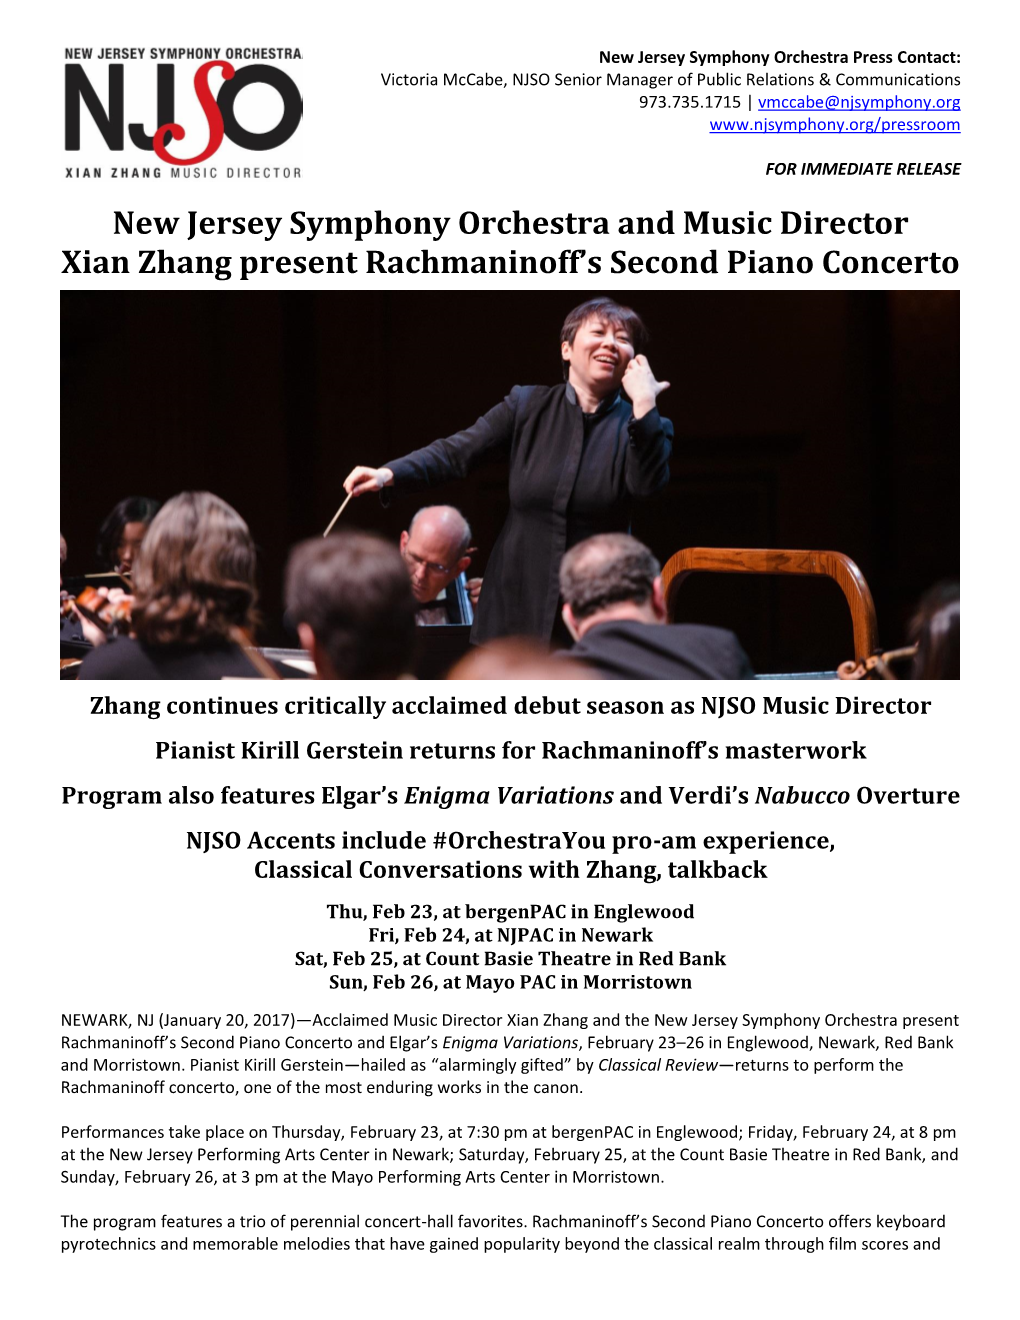 New Jersey Symphony Orchestra and Music Director Xian Zhang Present Rachmaninoff’S Second Piano Concerto